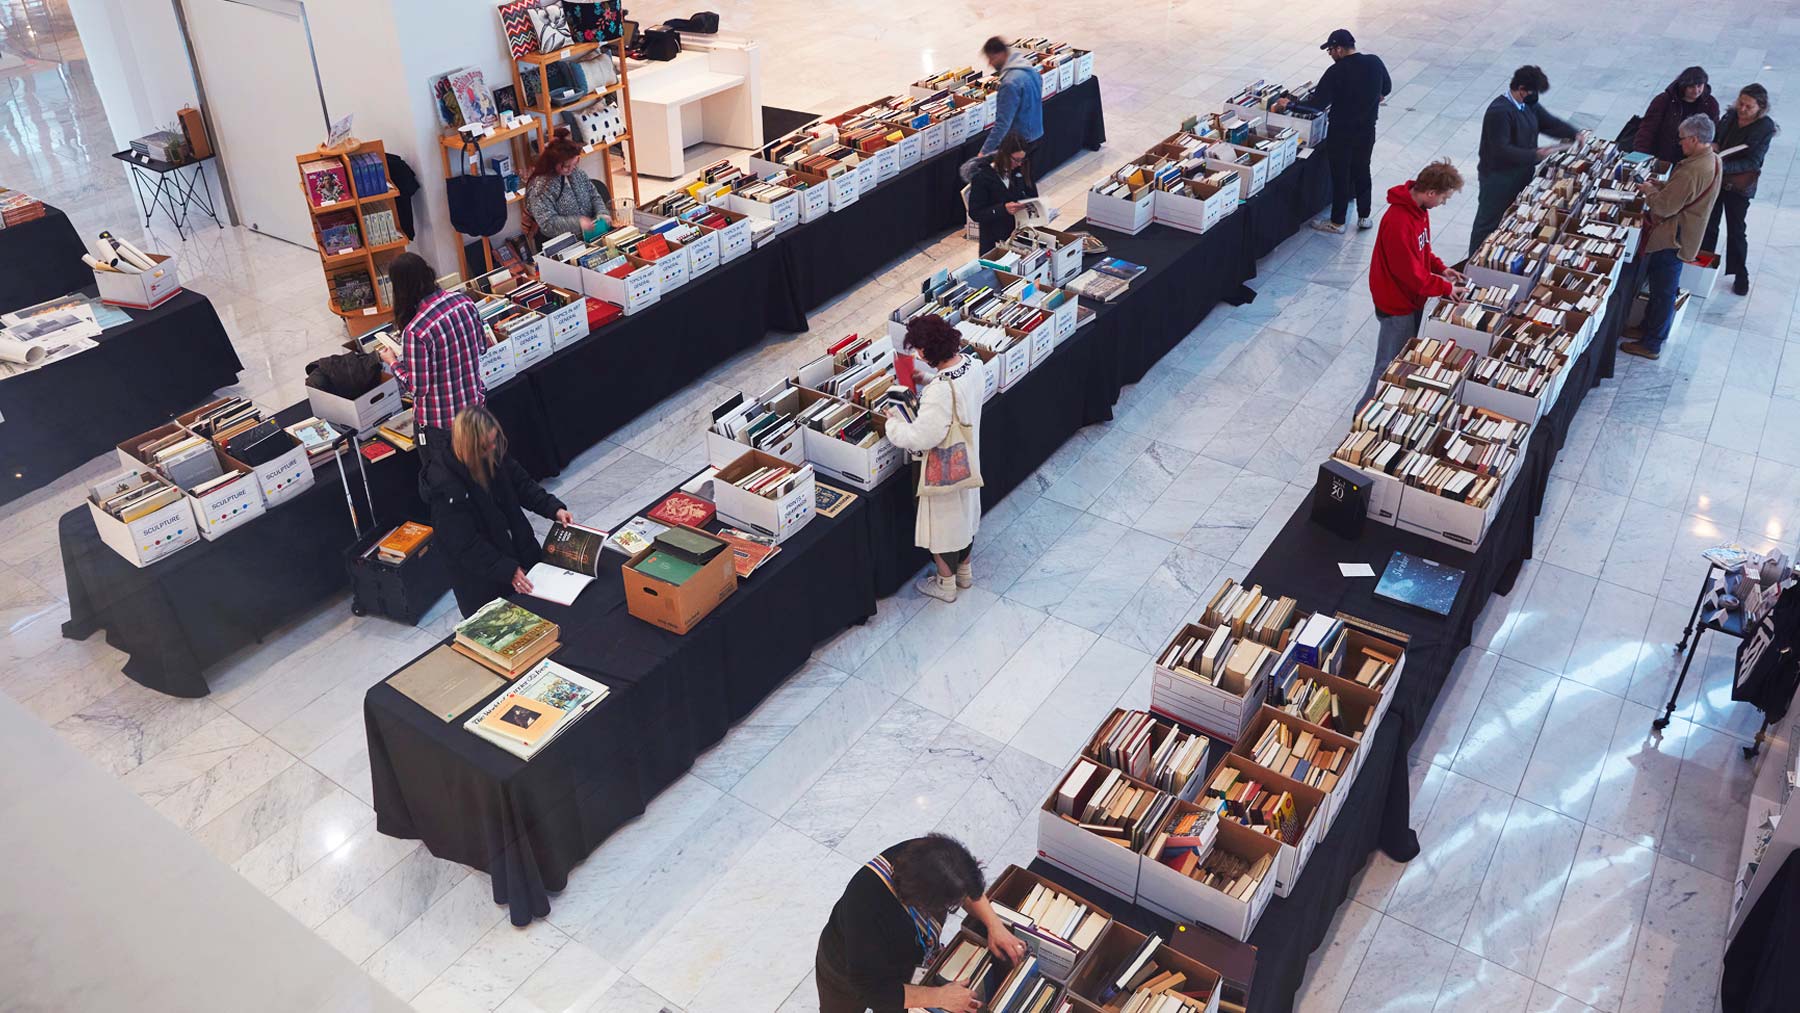 Small crowd browsing through books at the Museum book sale